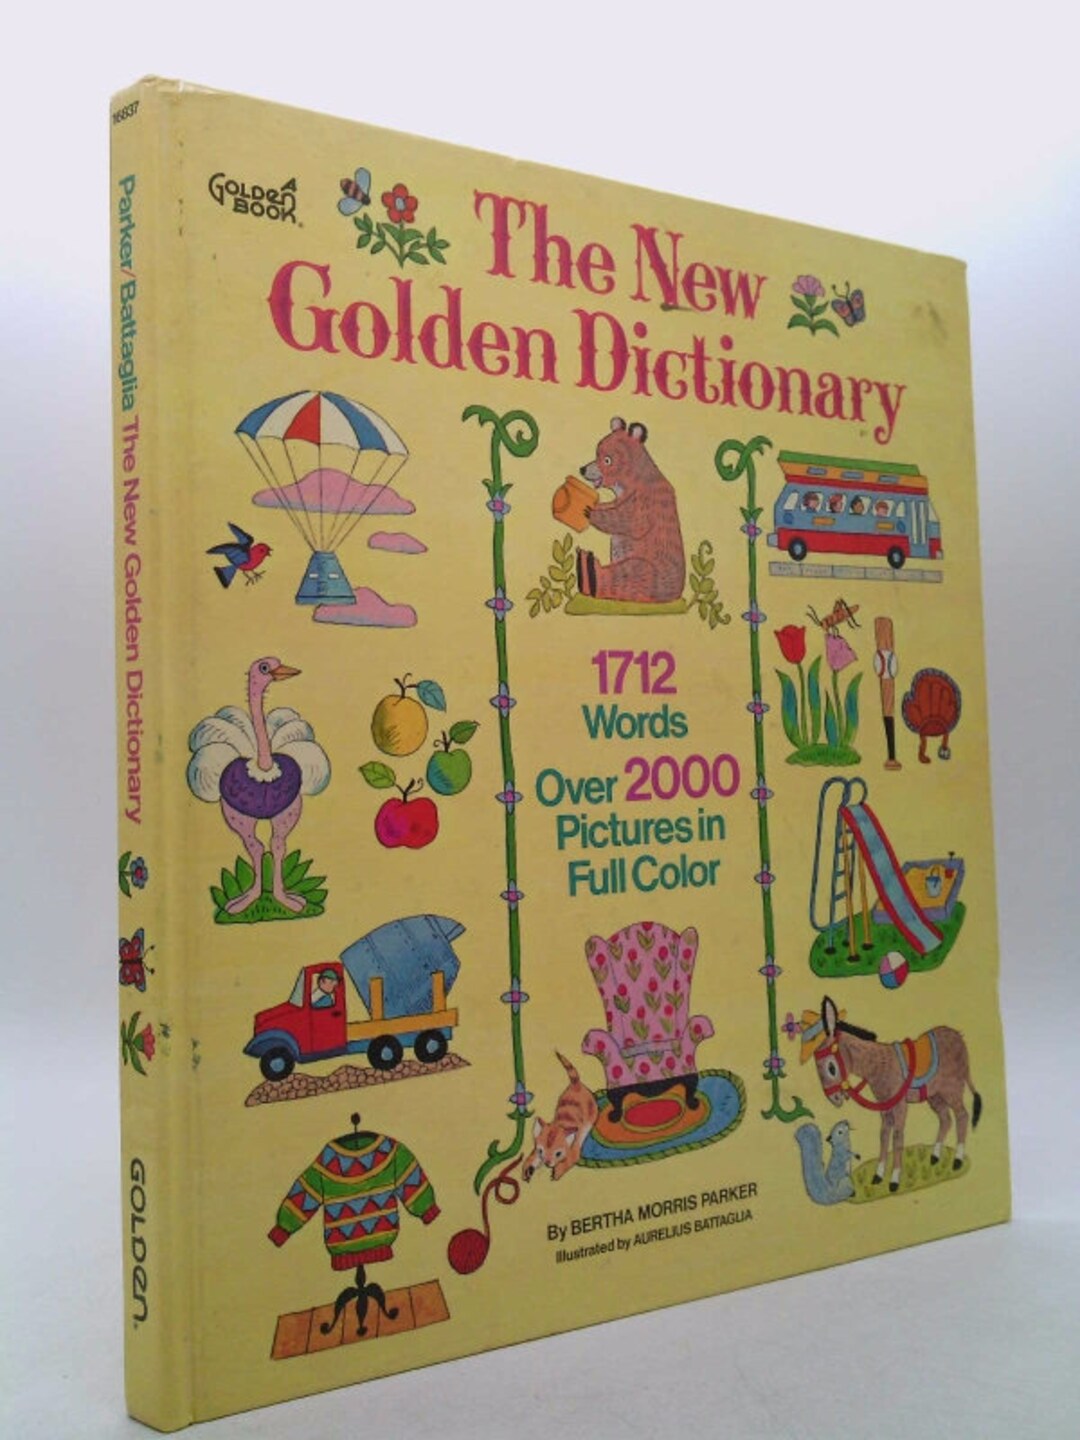 The New Golden Dictionary by Bertha Morris Parker - Etsy